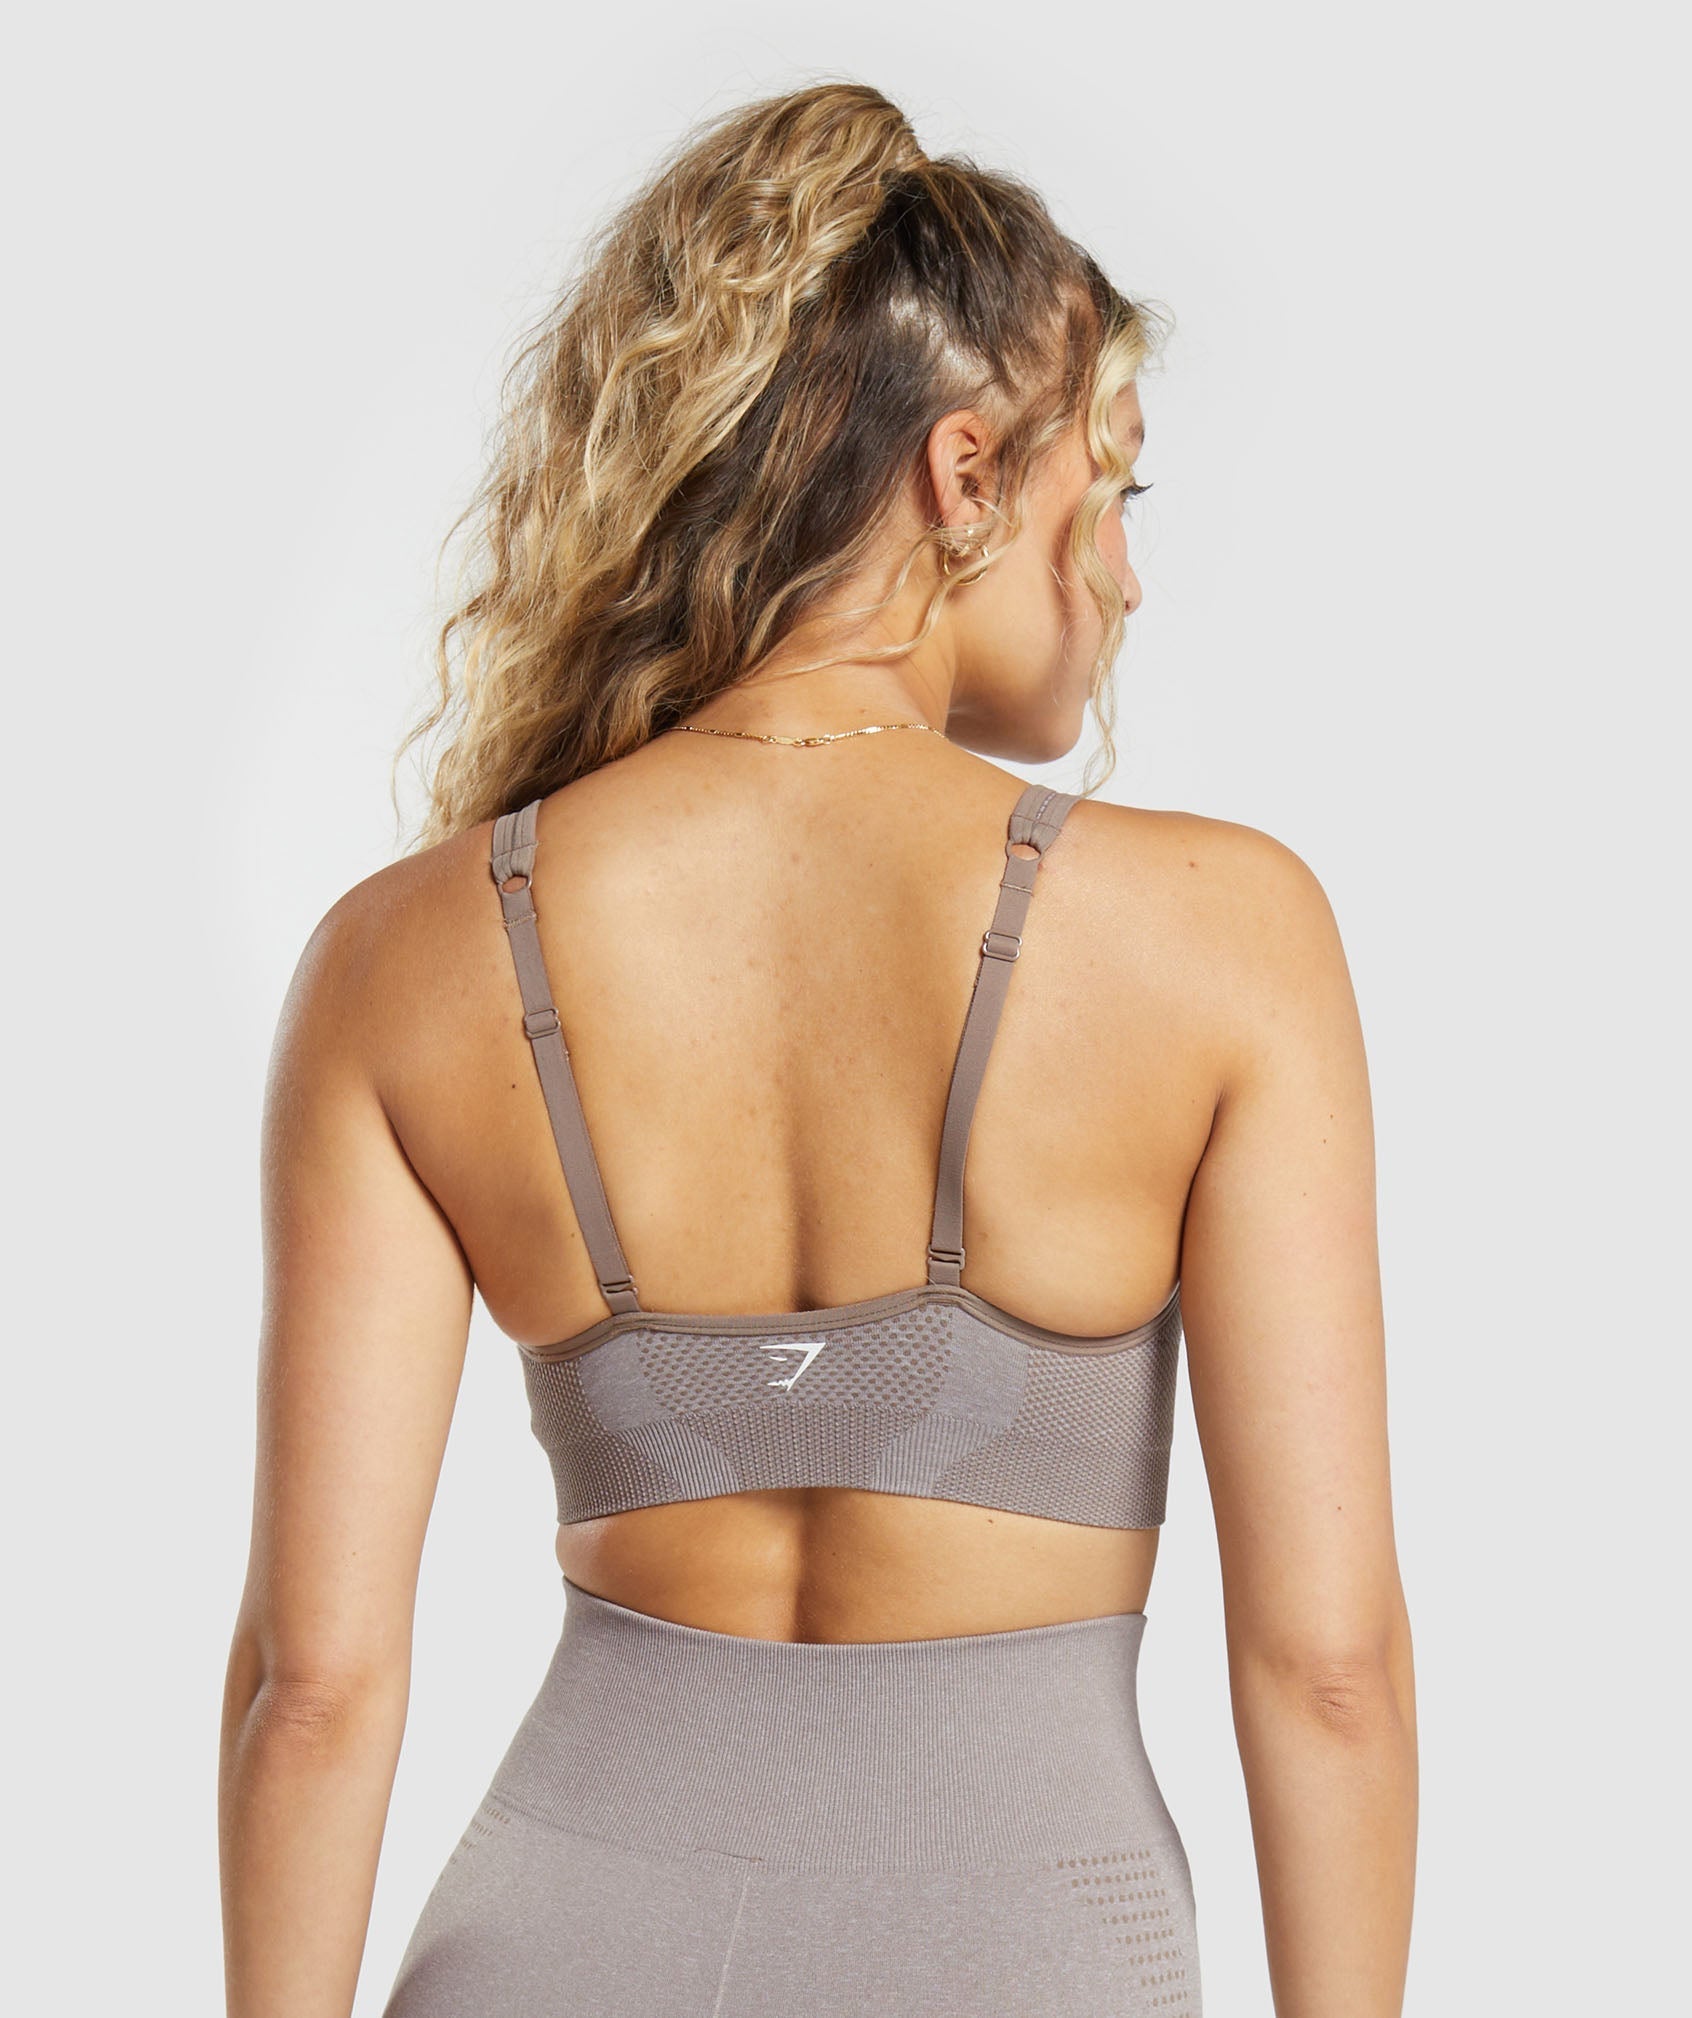 Gymshark V Neck Taupe Training Bra Tan Size M - $45 New With Tags - From  Elizabeth